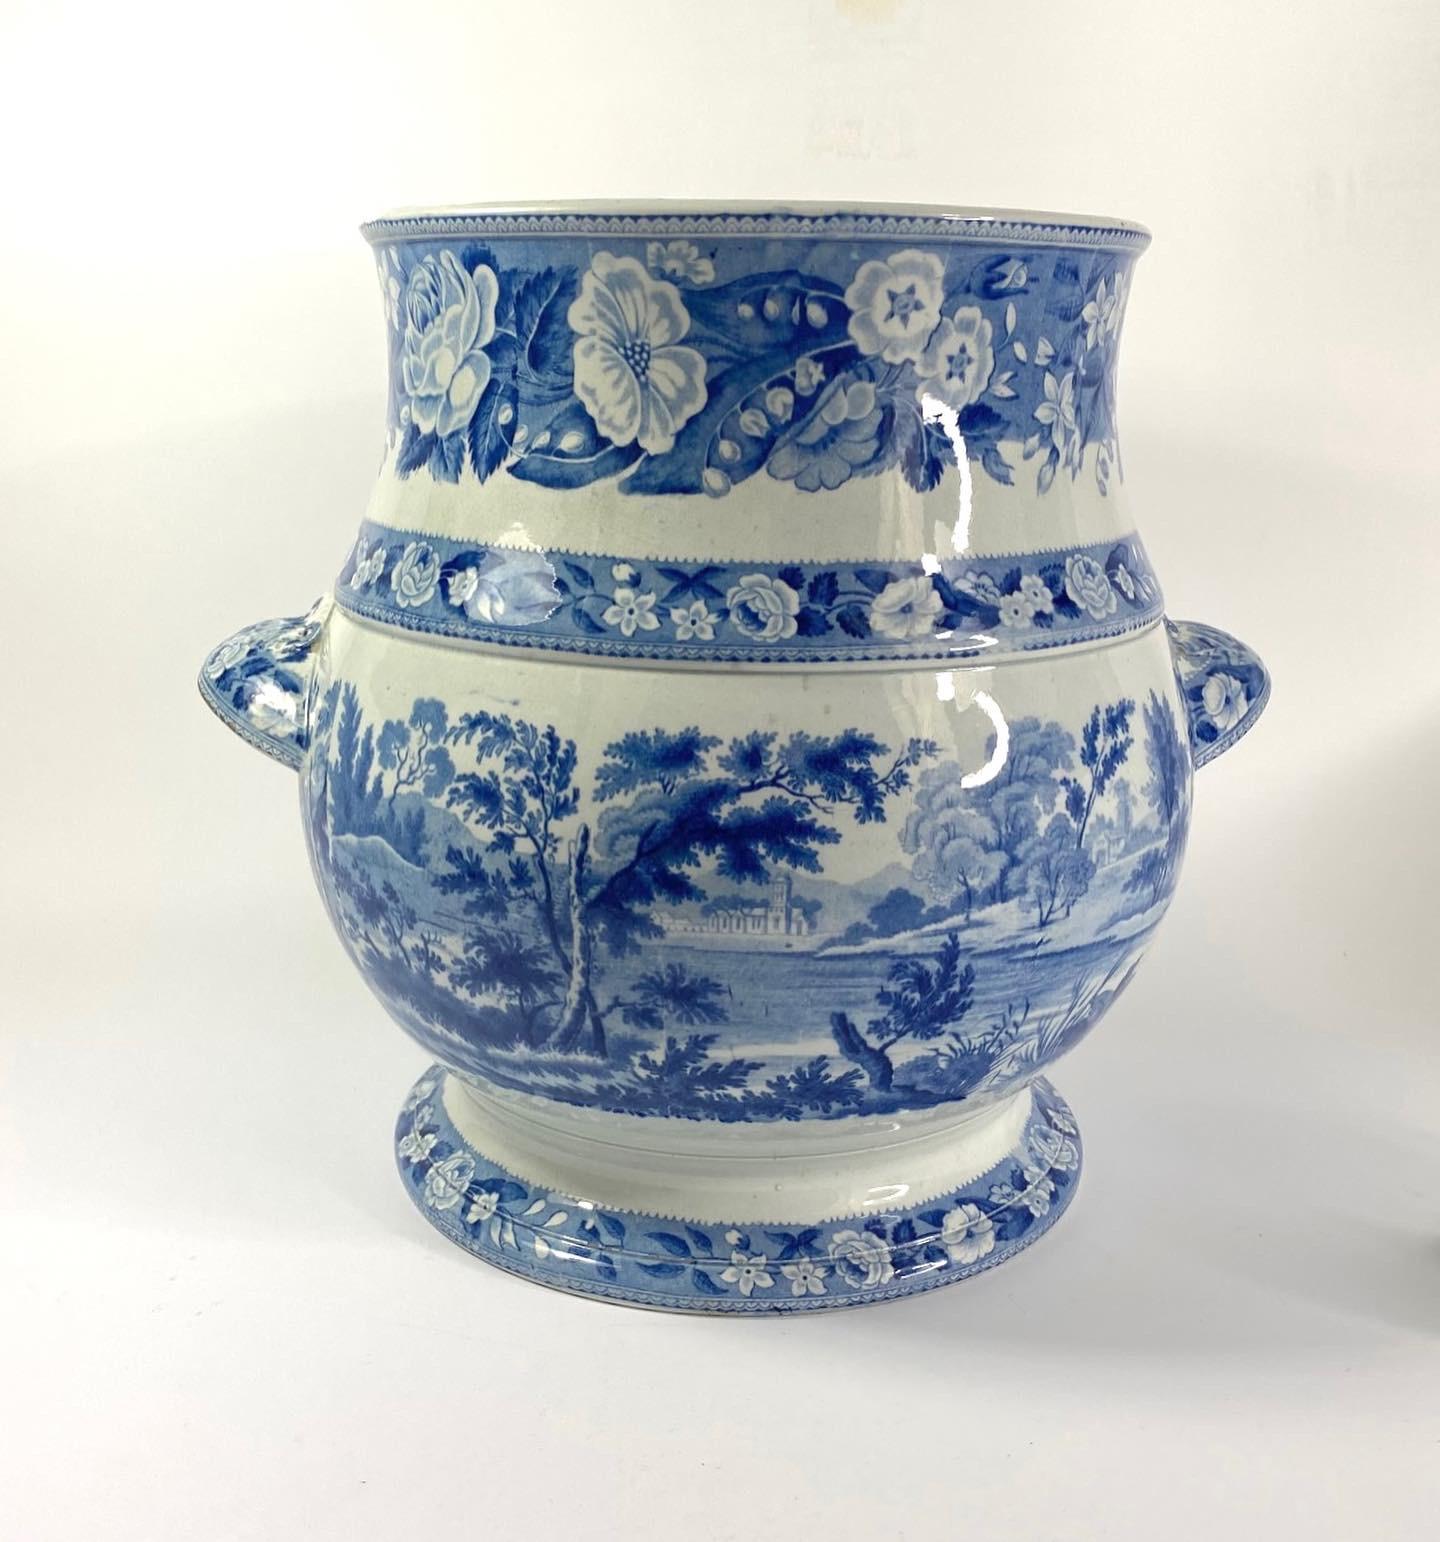 Fired Staffordshire blue and white printed pail, c. 1830.